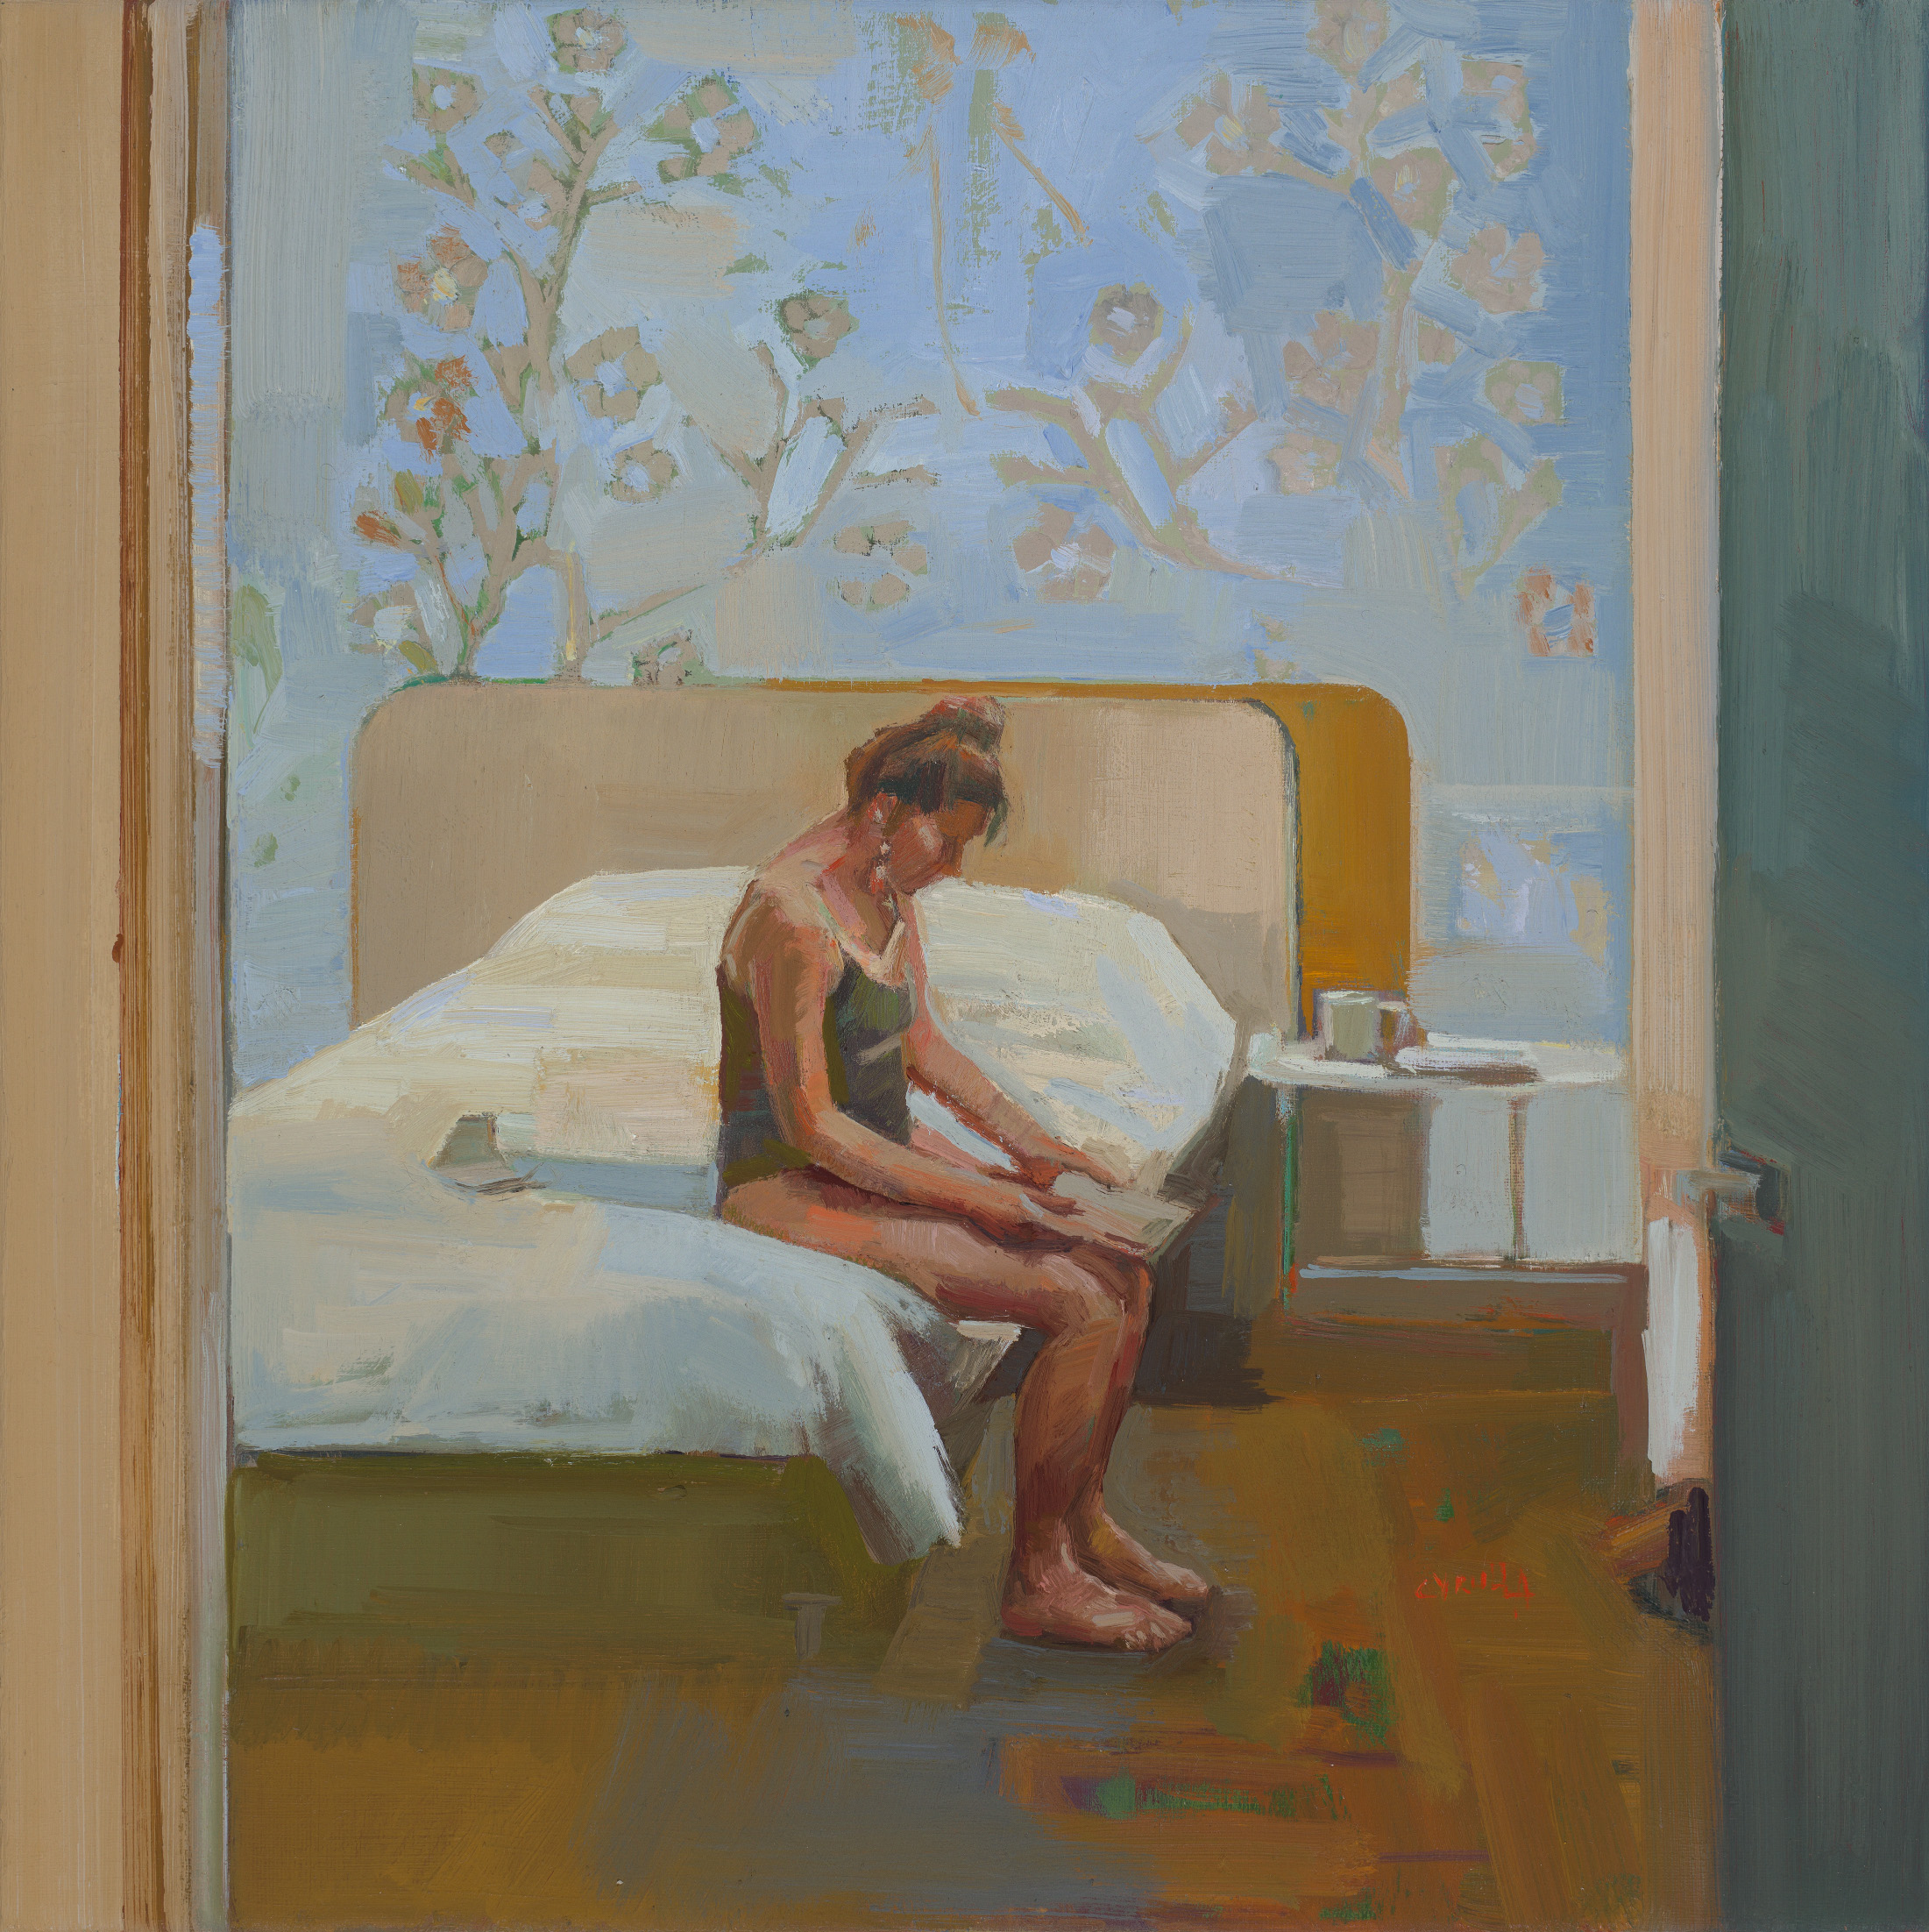 Cyrulla 'After Hopper with blue wallpaper and flower motif' oil on linen 40 x 40cm $4,900